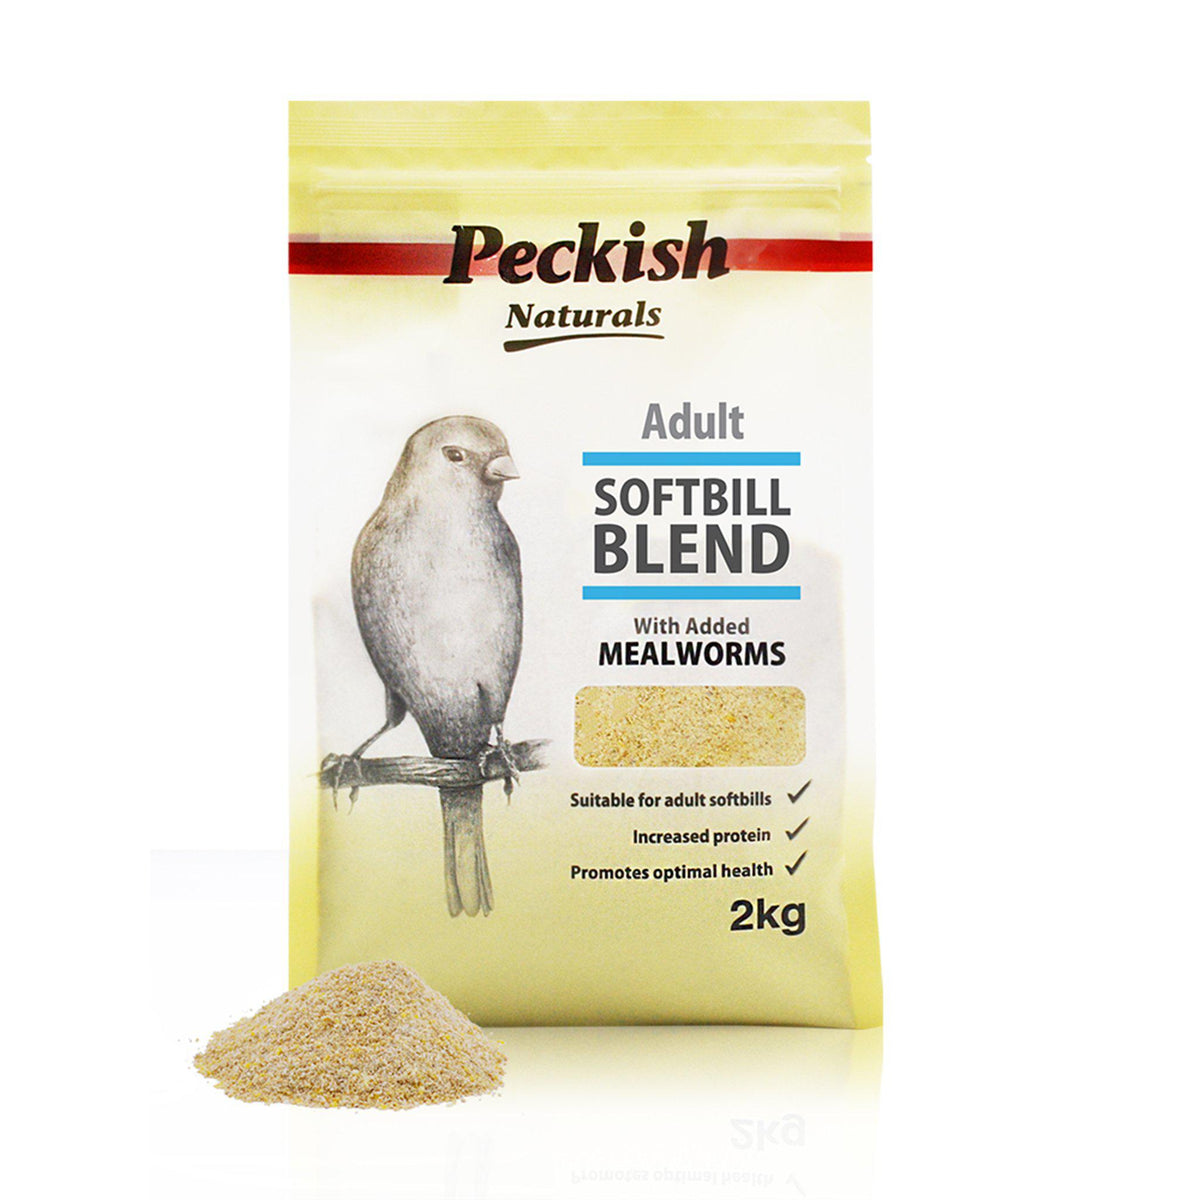 Peckish Naturals Adult Softbill Blend - Mealworm - ComfyPet Products